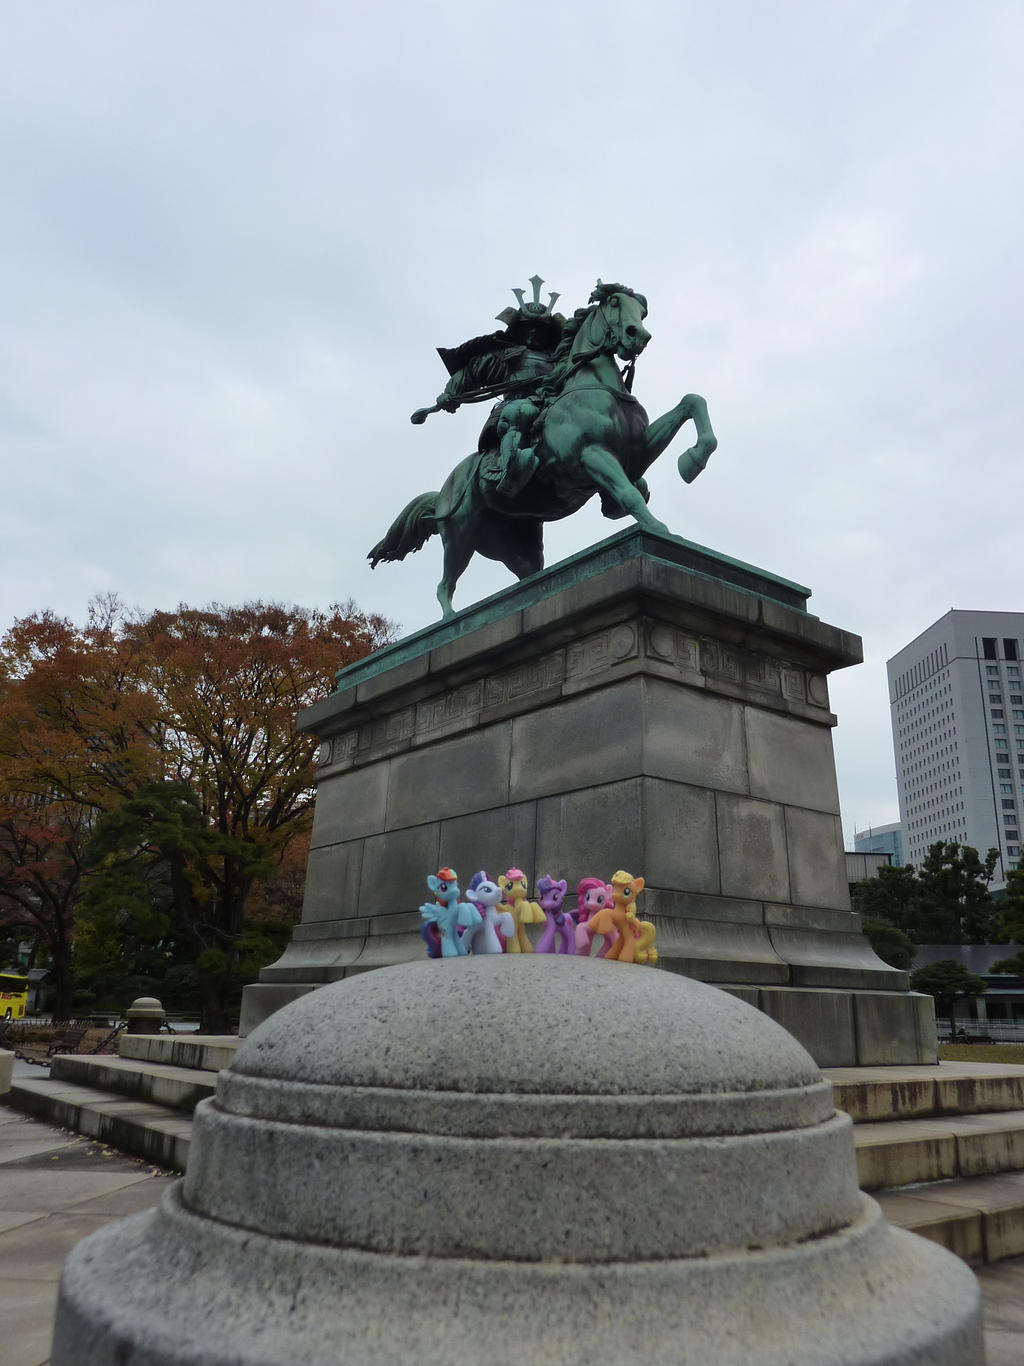 Imperial palace ponies